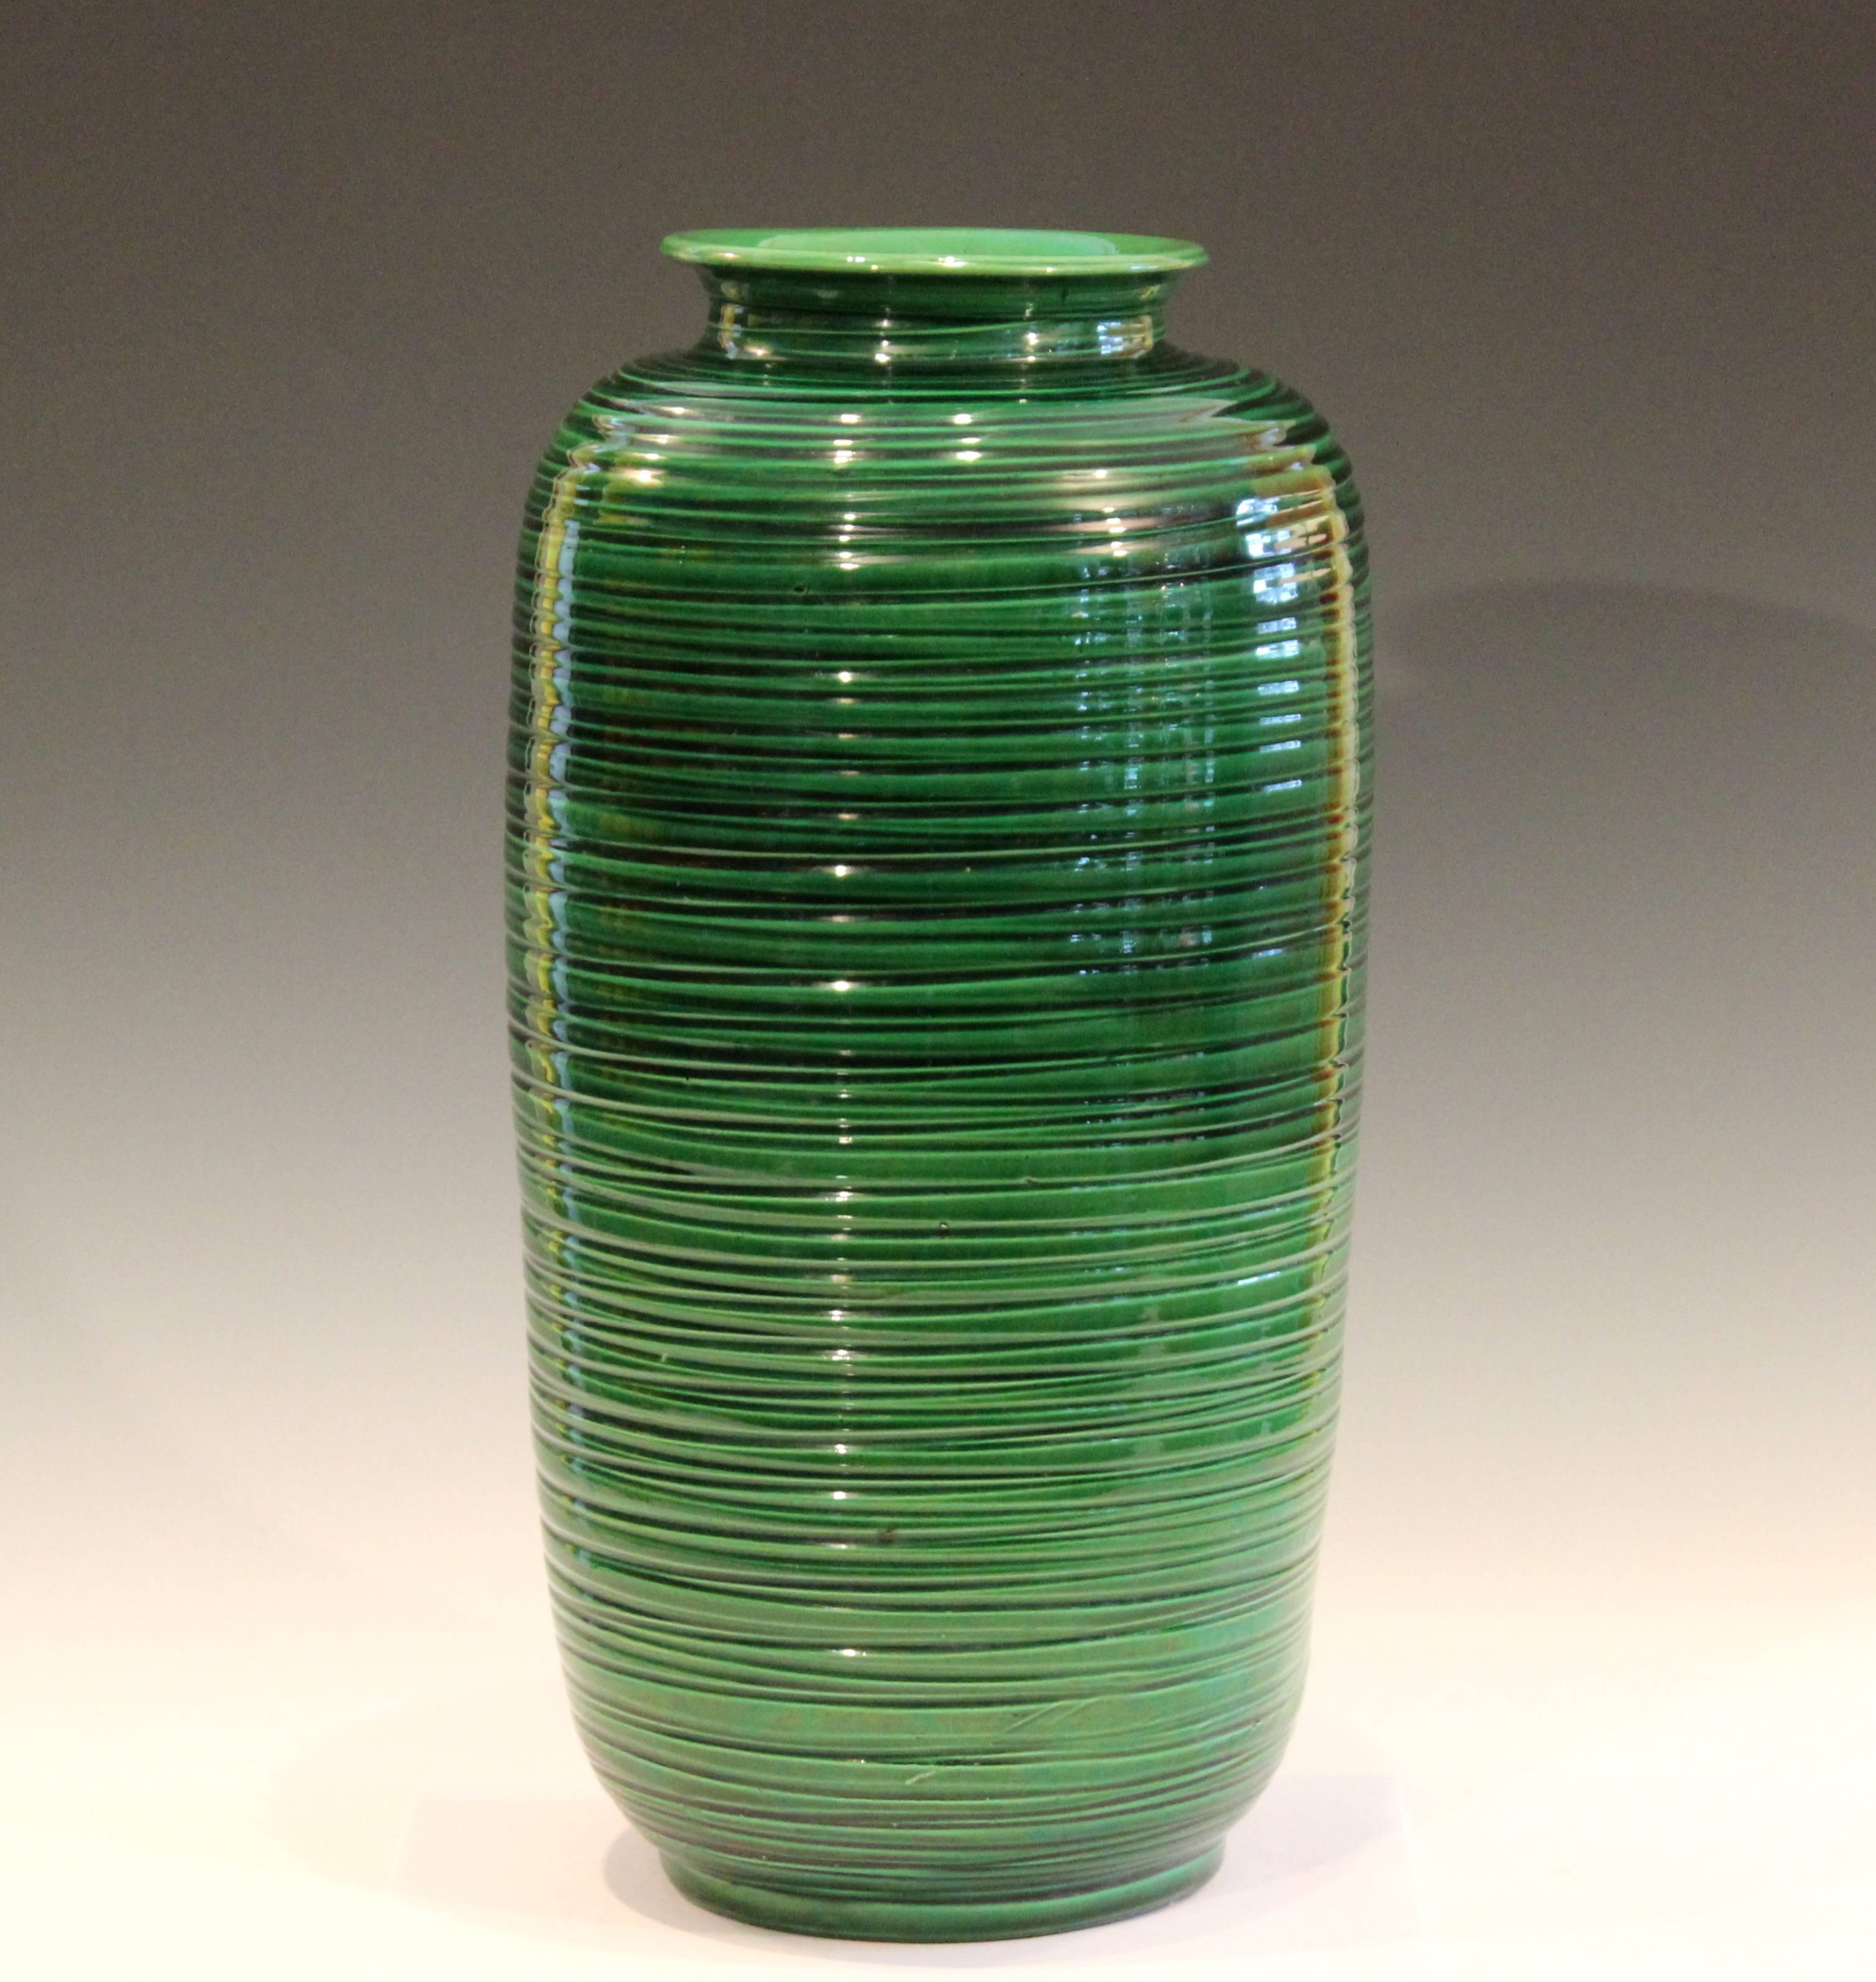 Large Awaji pottery canister form vase with accentuated ribs and deep green glaze, circa 1910s. Measures: 17 3/4